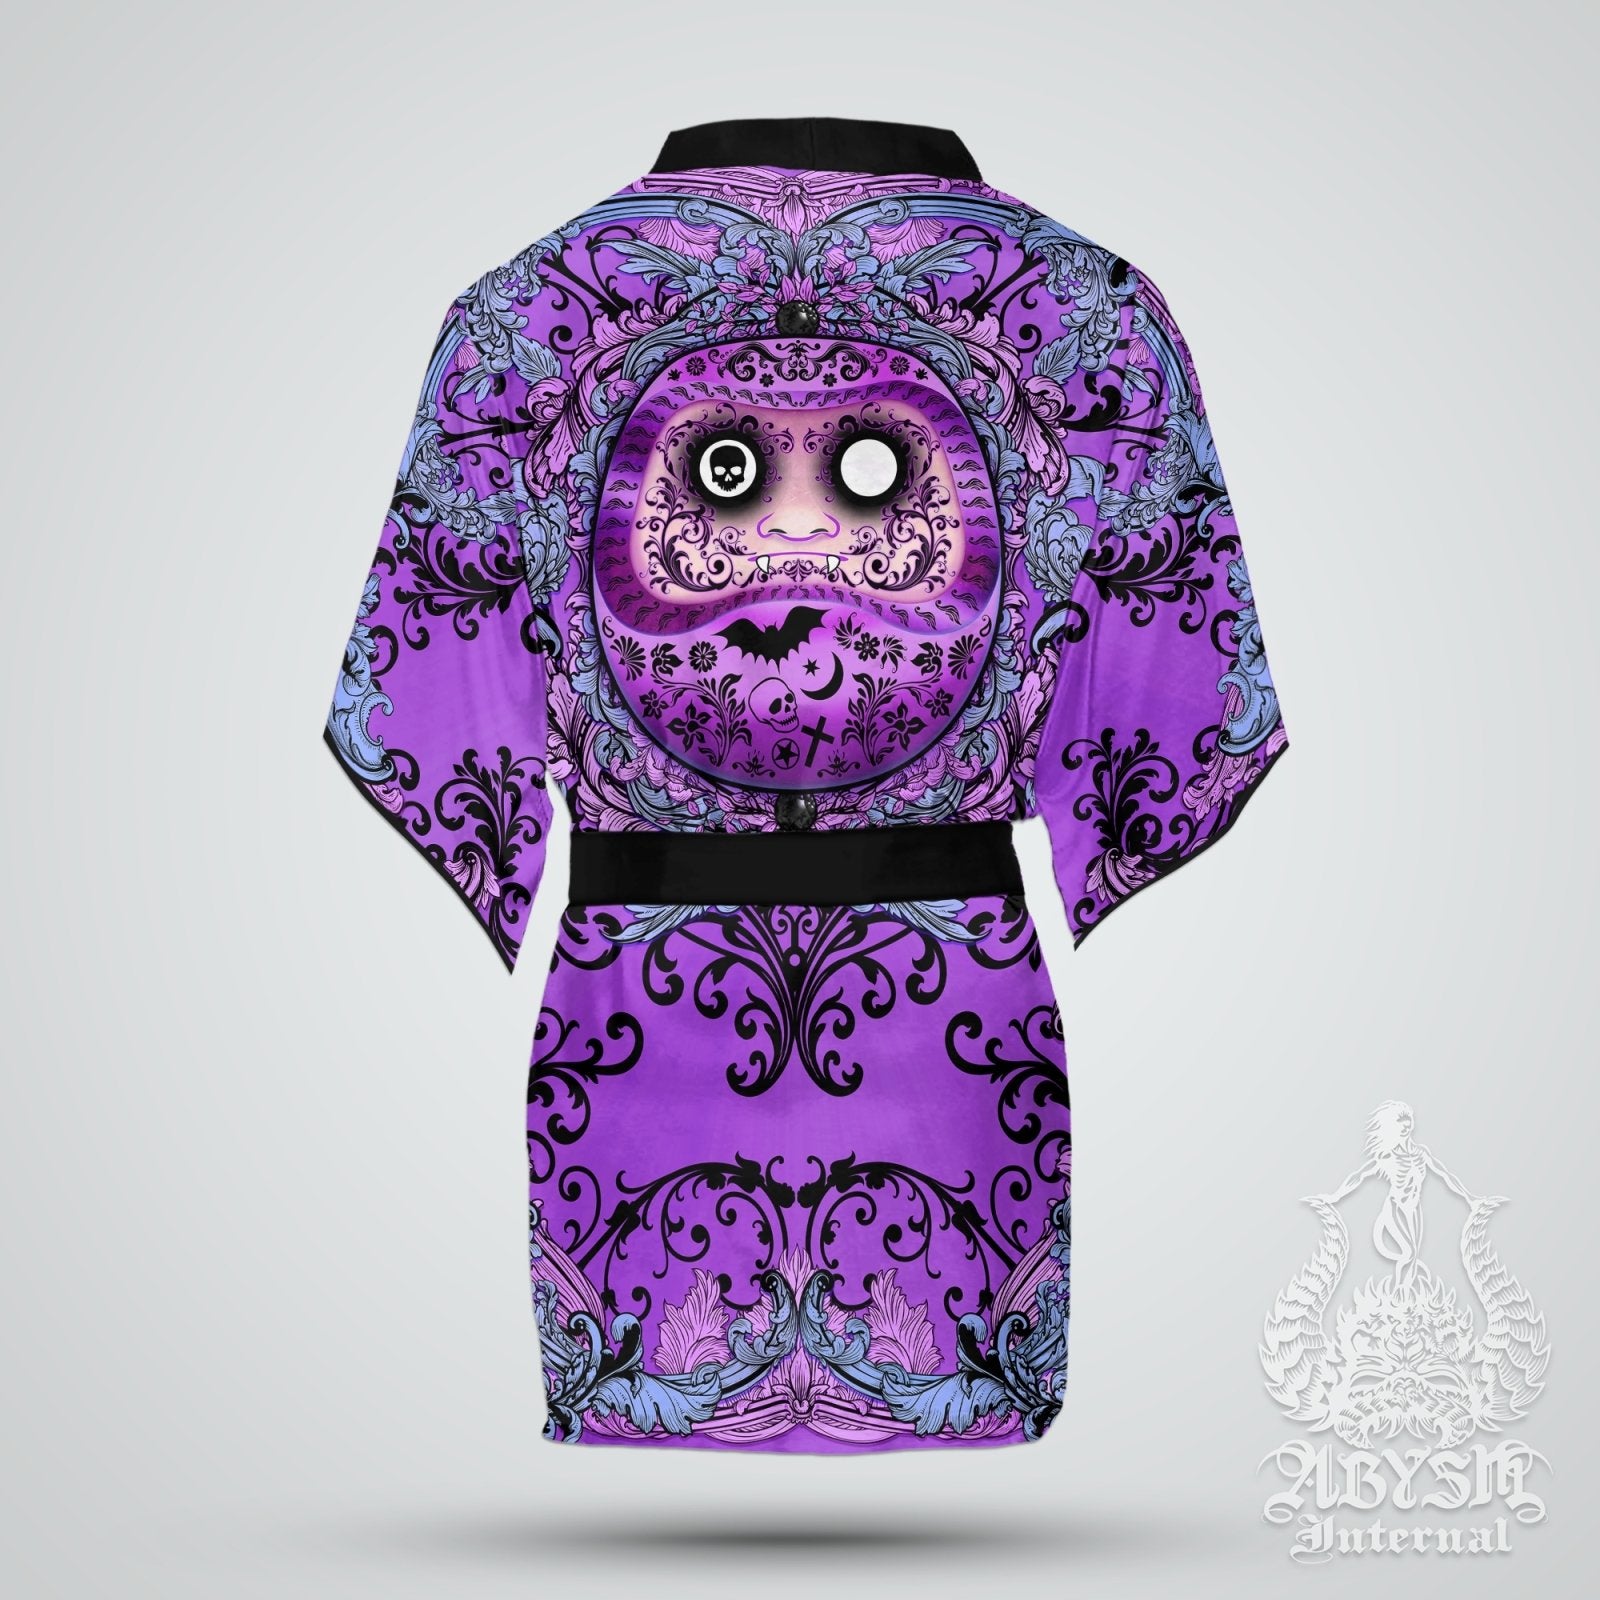 Daruma Cover Up, Beach Outfit, Party Kimono, Japanese Summer Festival Robe, Indie and Alternative Clothing, Unisex - Pastel Goth - Abysm Internal